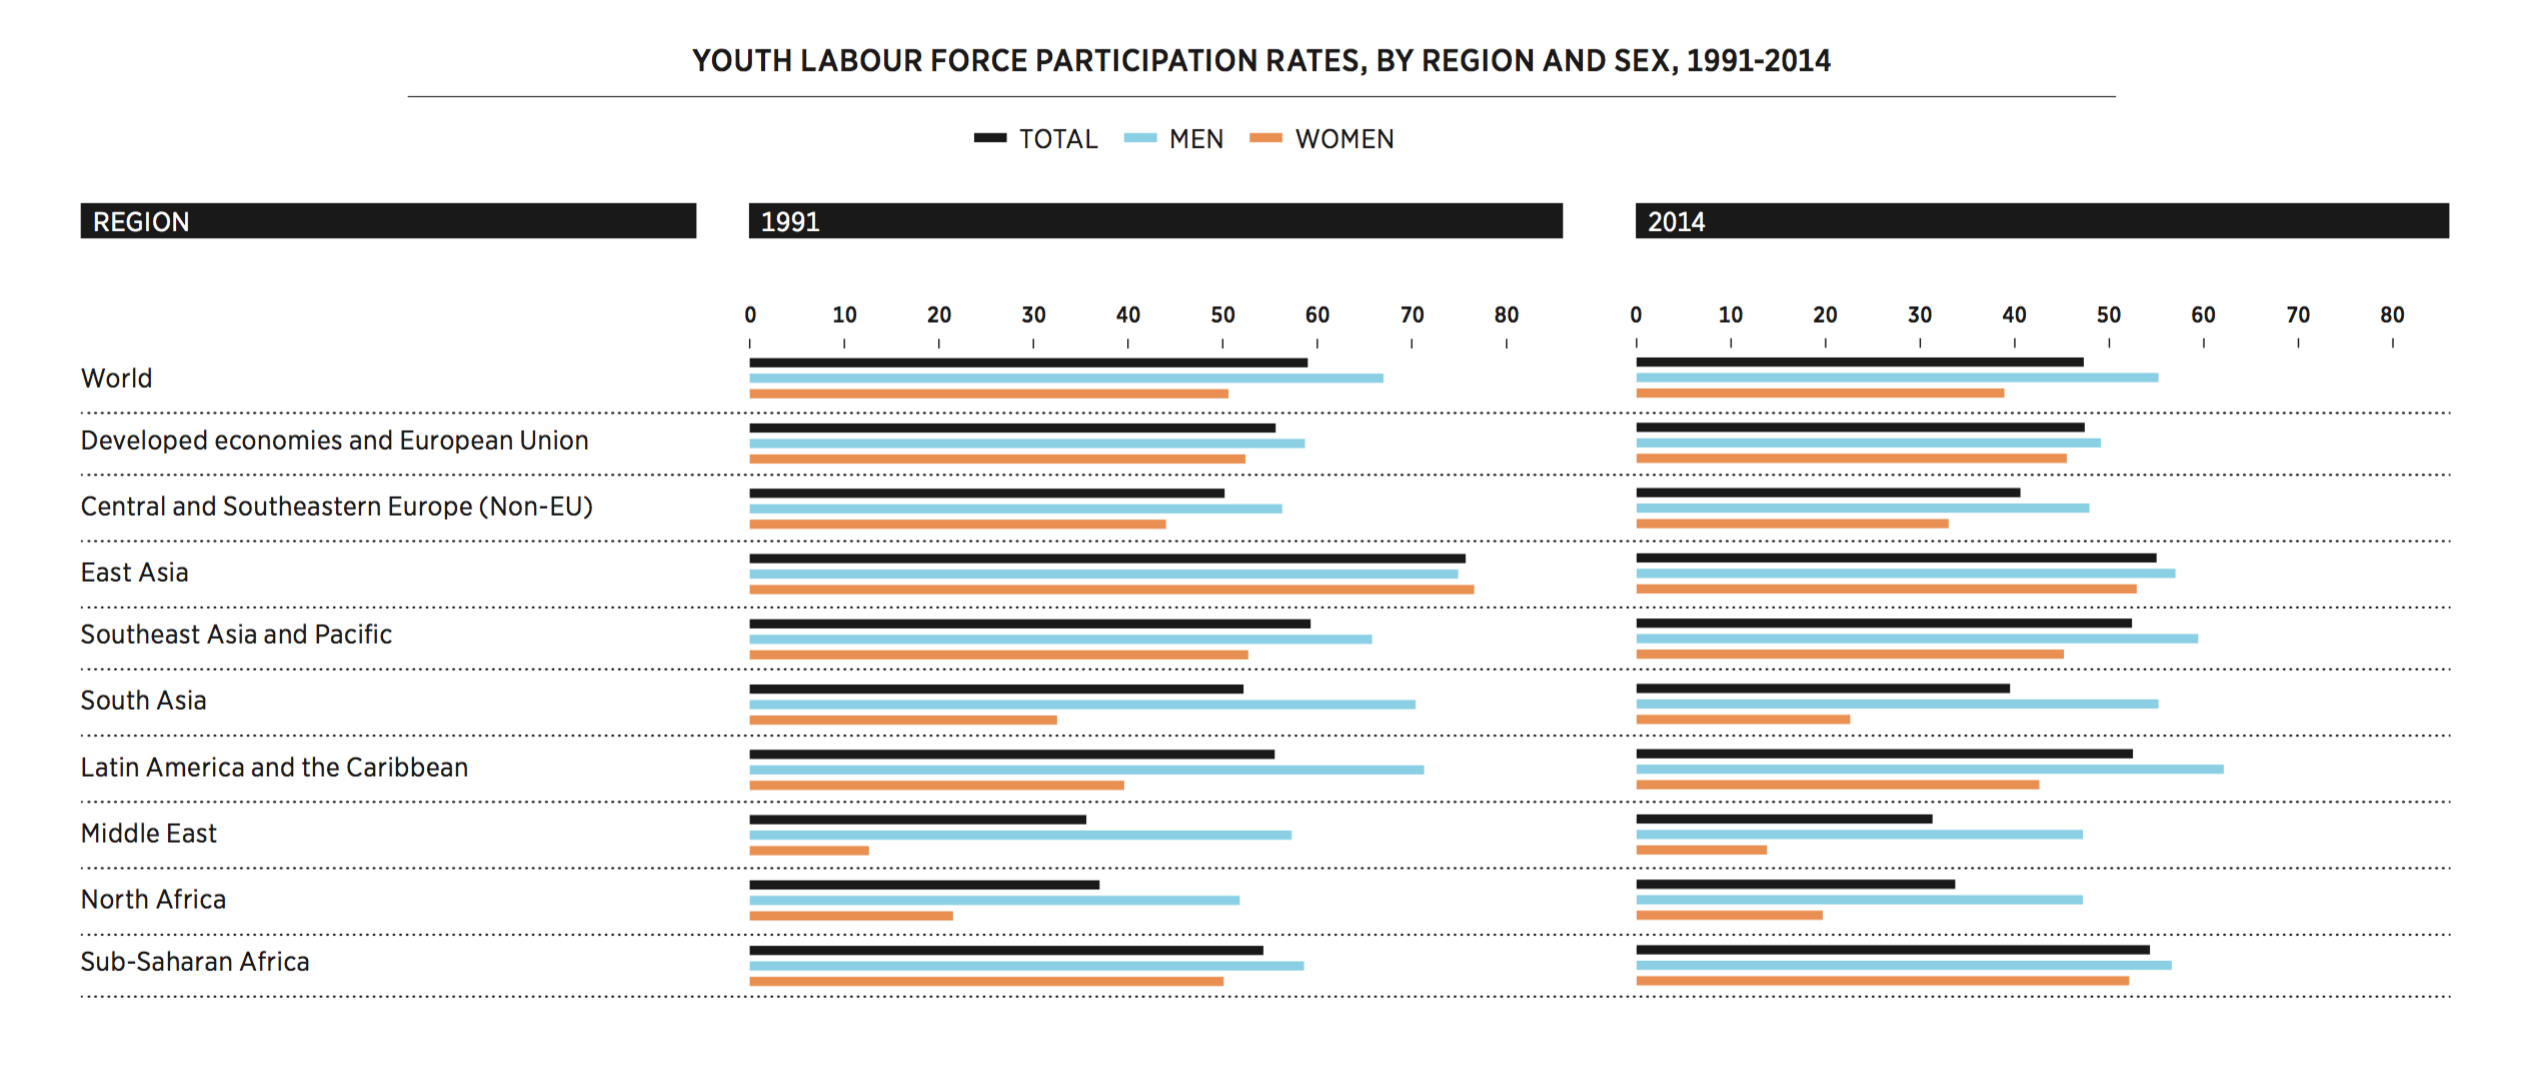 Female labour participation in the MENA region is by far the lowest in the world. 